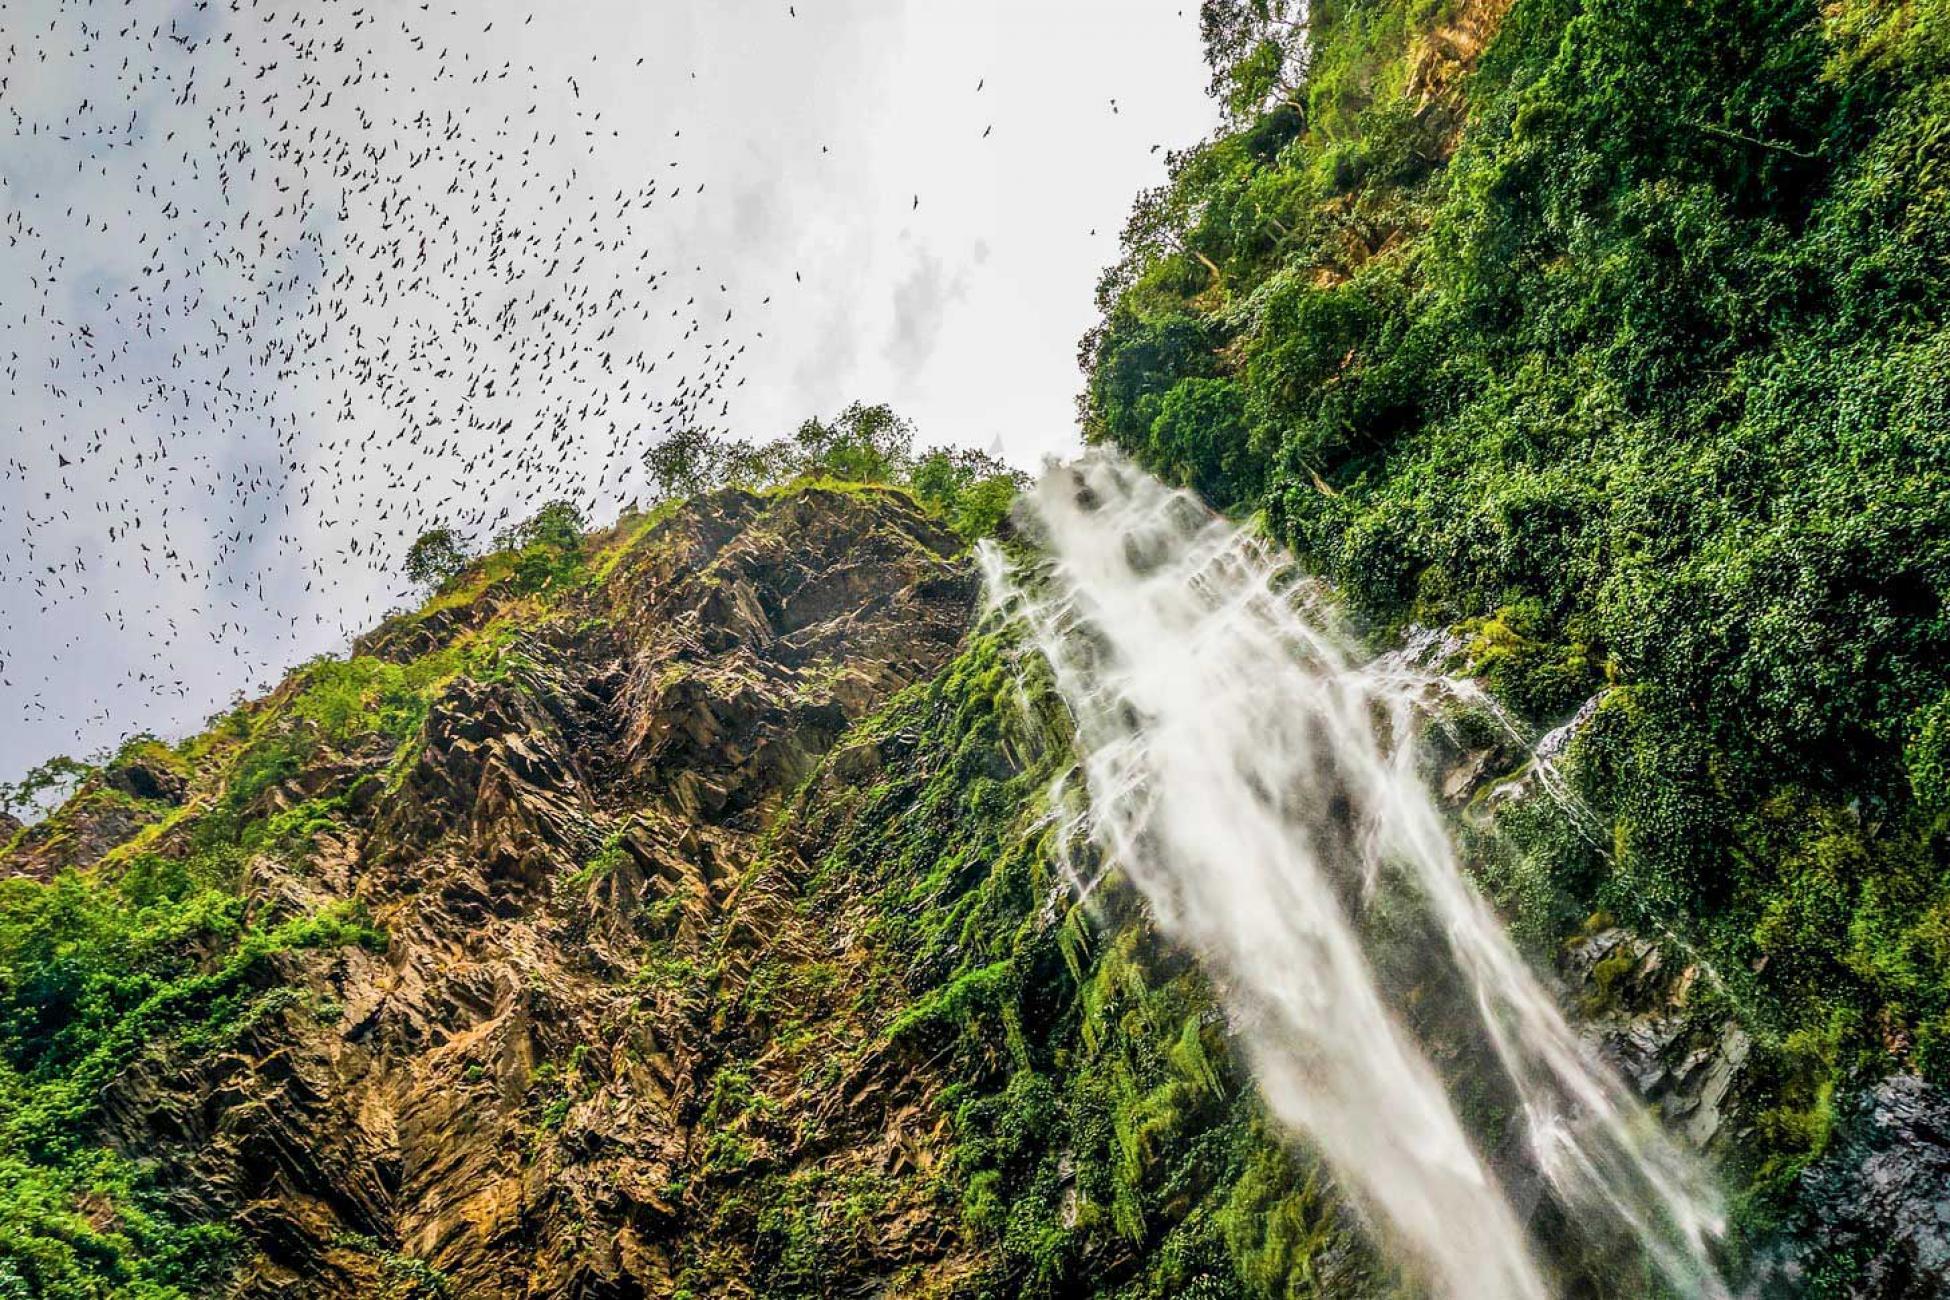 Thousands of bats fly overhead near the Wli Waterfalls in the Volta Region Ghana. This photo was shortlisted as part of Verge’s annual photo contest.